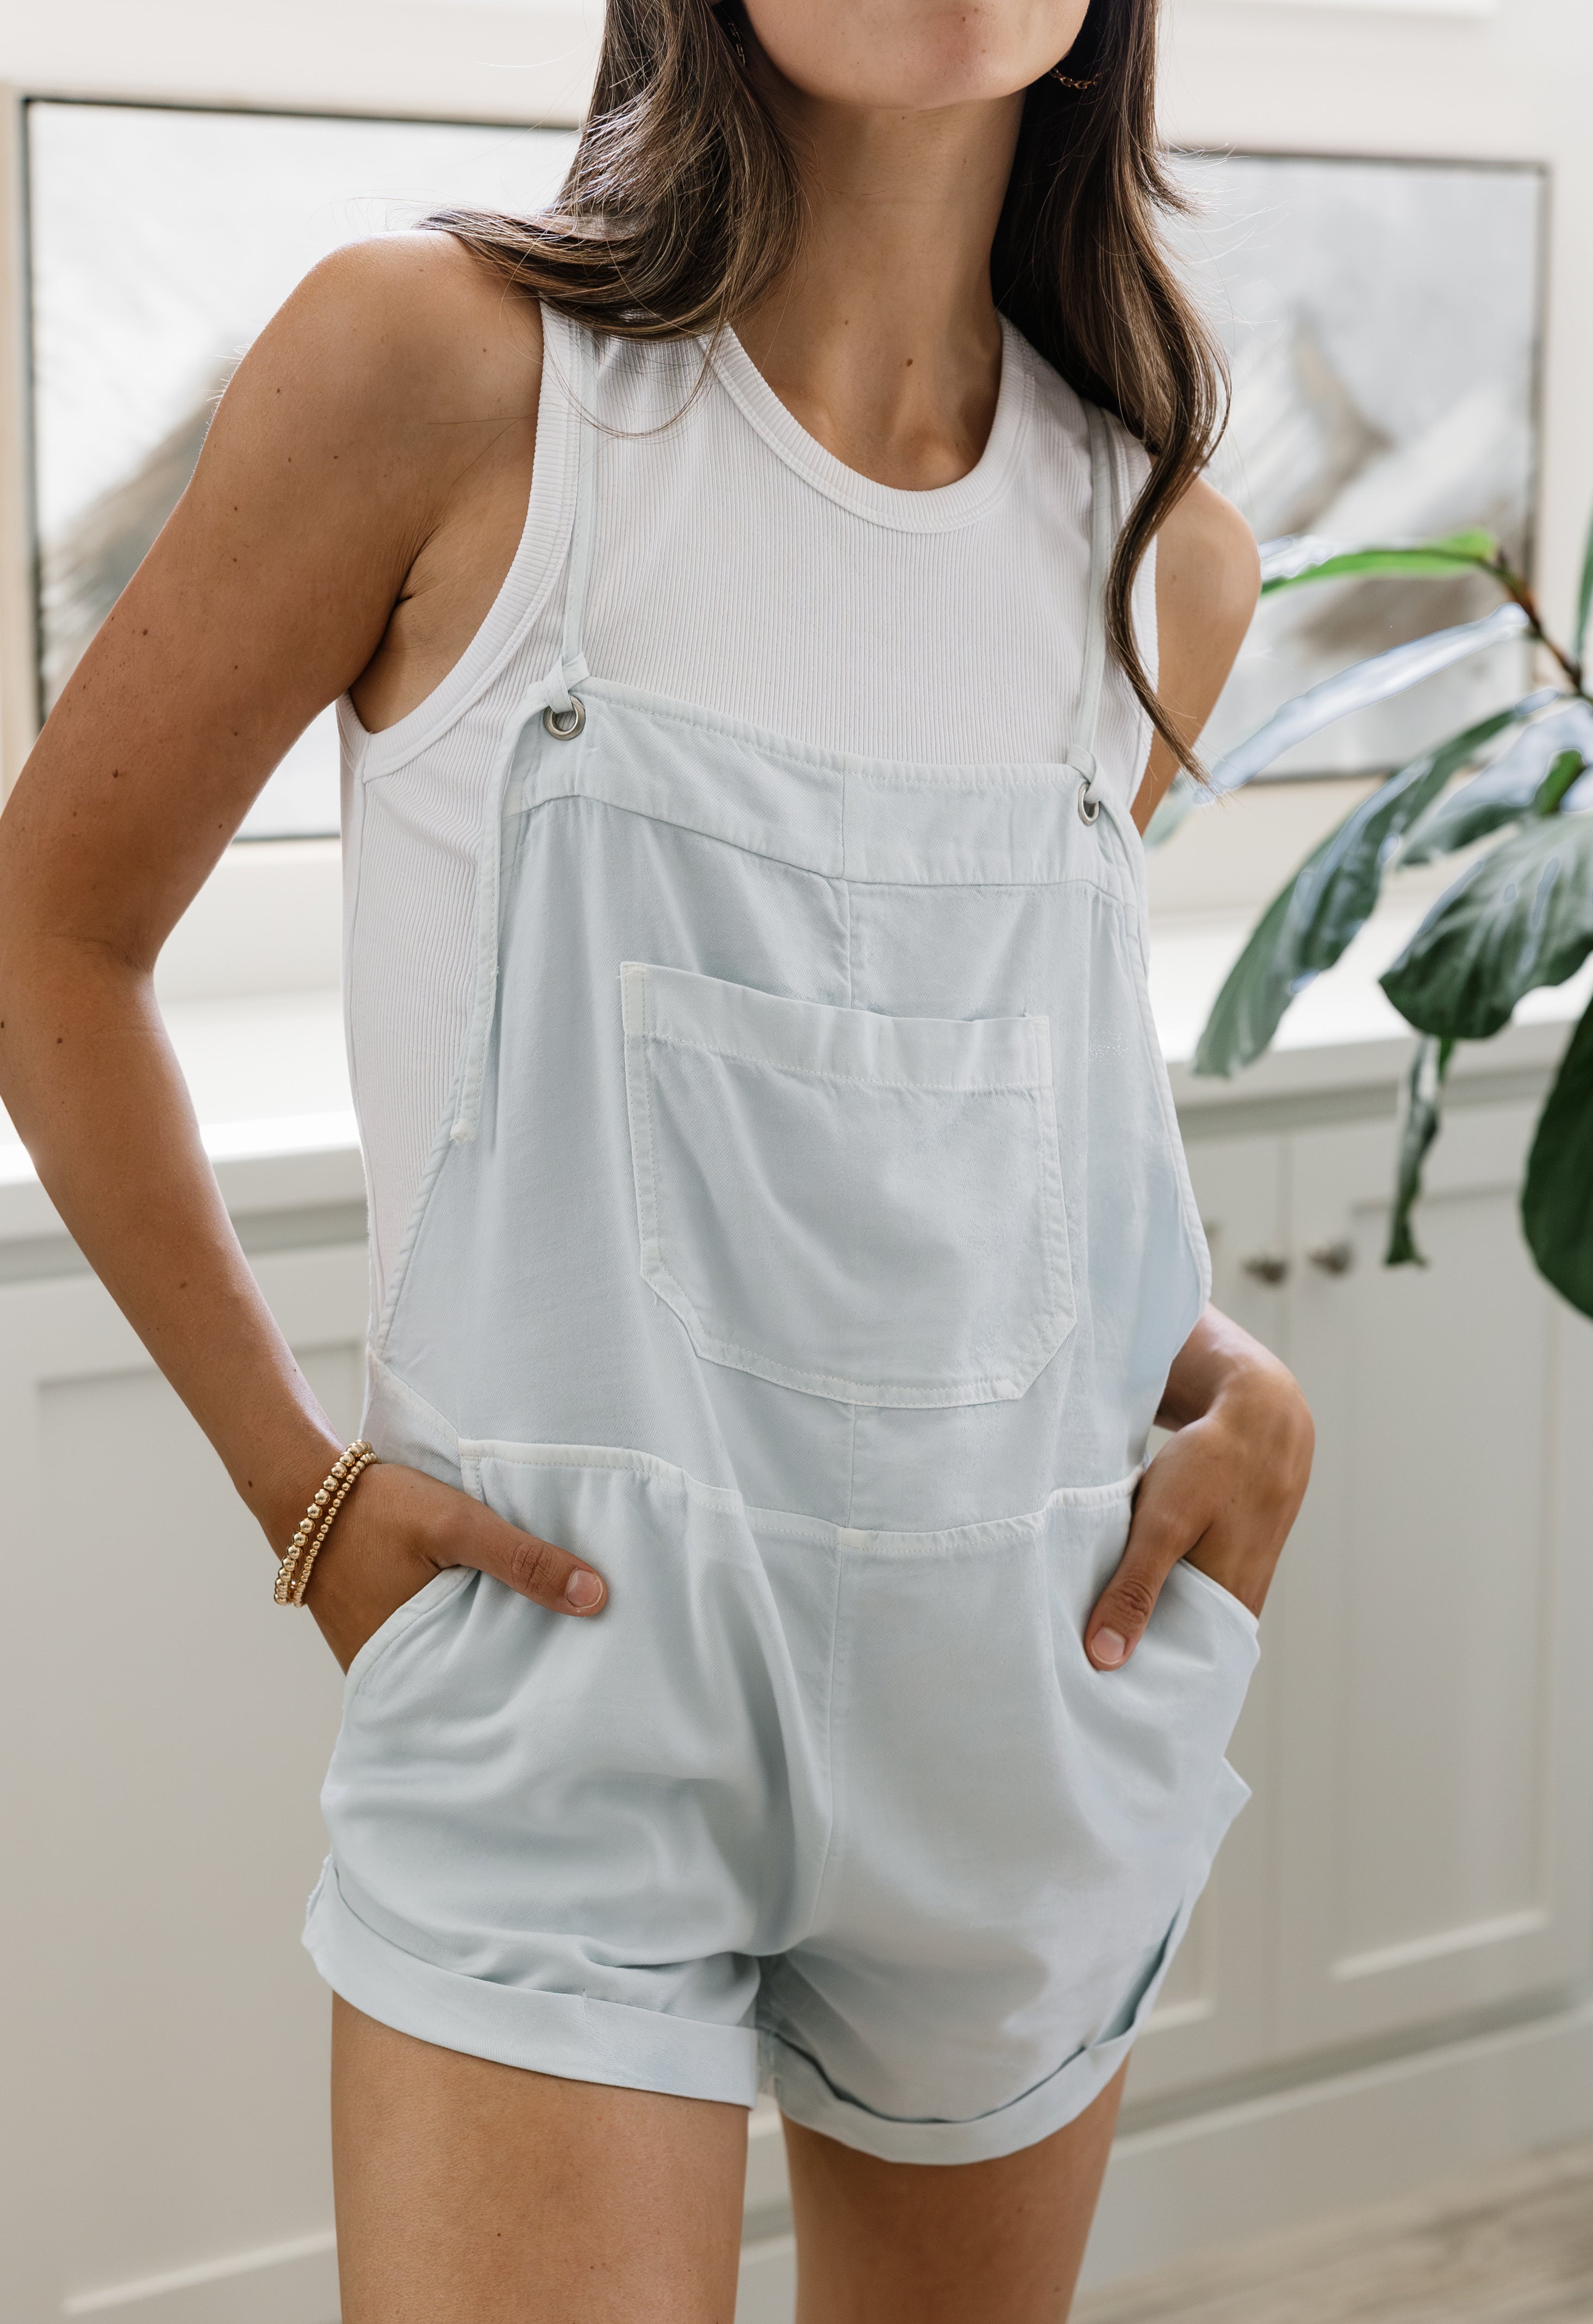 Wild Pursuit Romper - LIGHT CHAMBRAY - willows clothing ROMPER